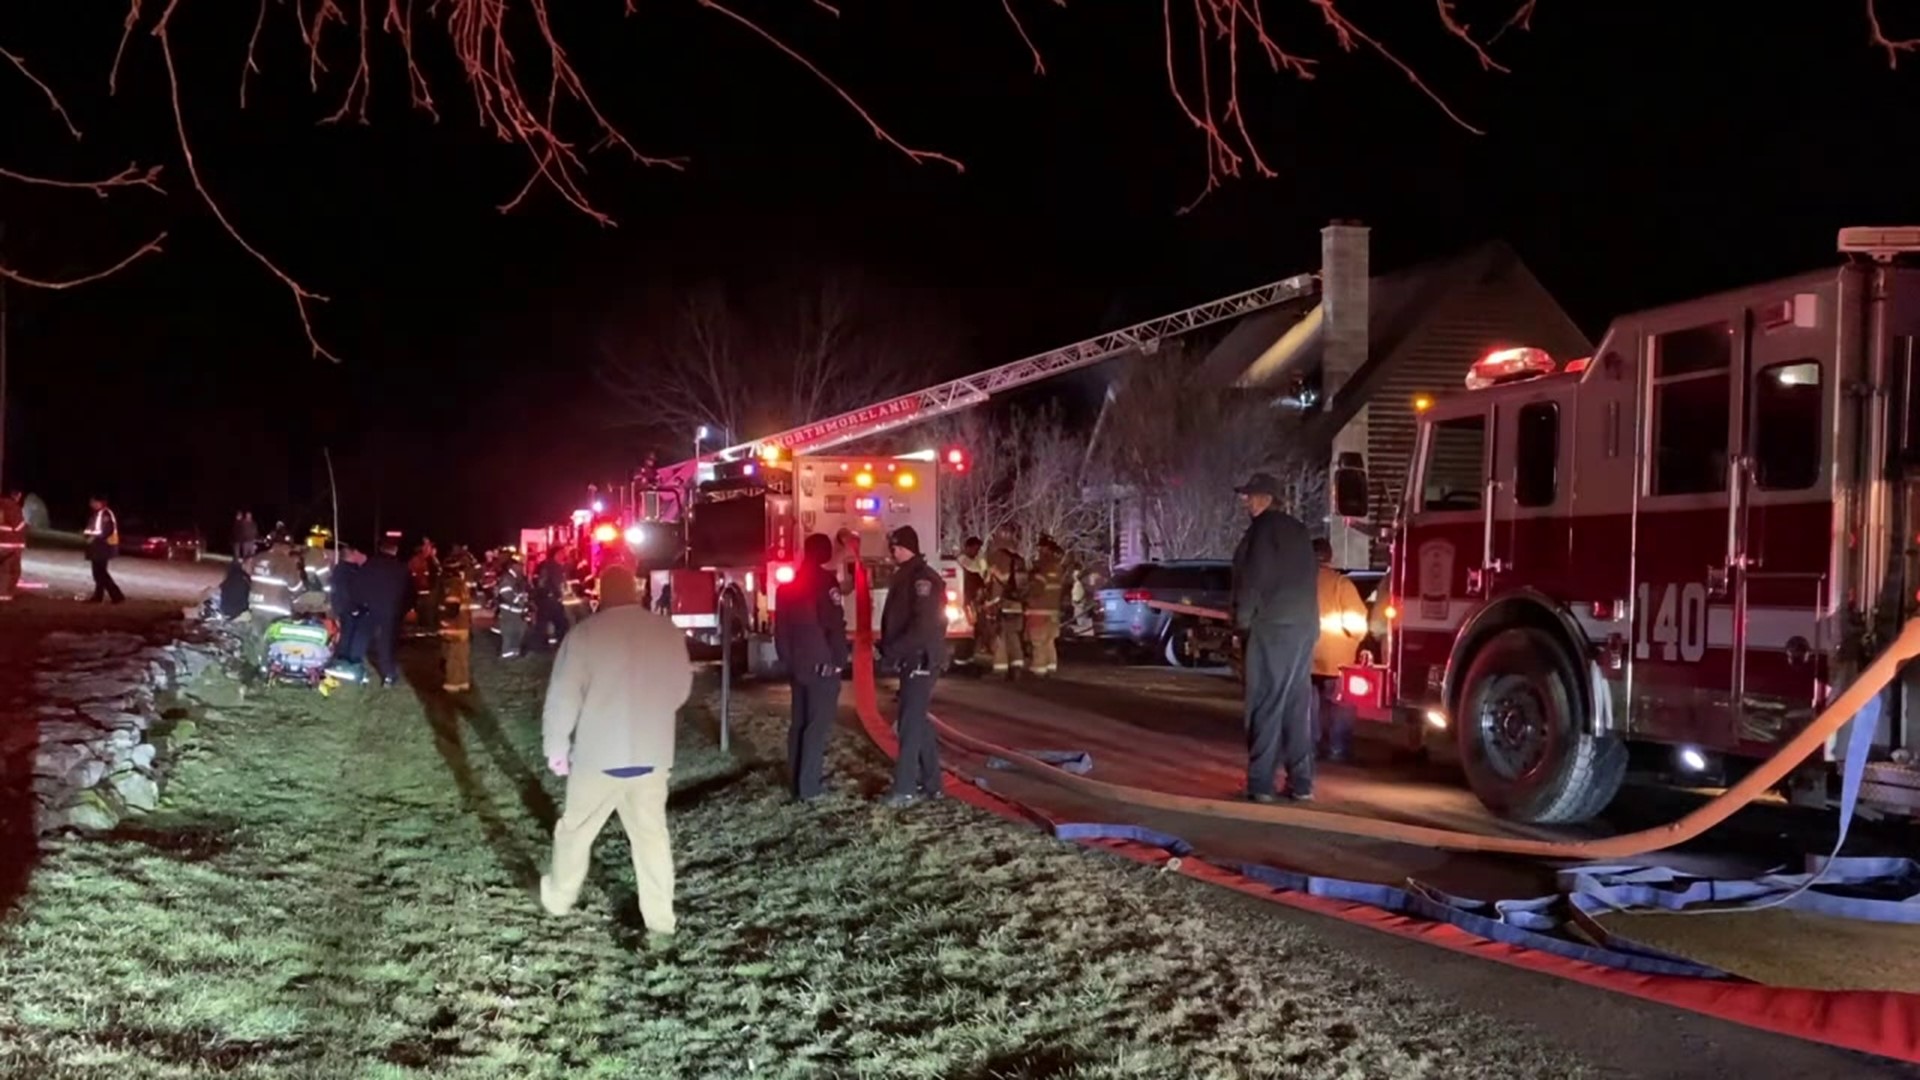 Flames broke out around 10 p.m. Saturday night along Levitt Hill Road in Northmoreland Township.